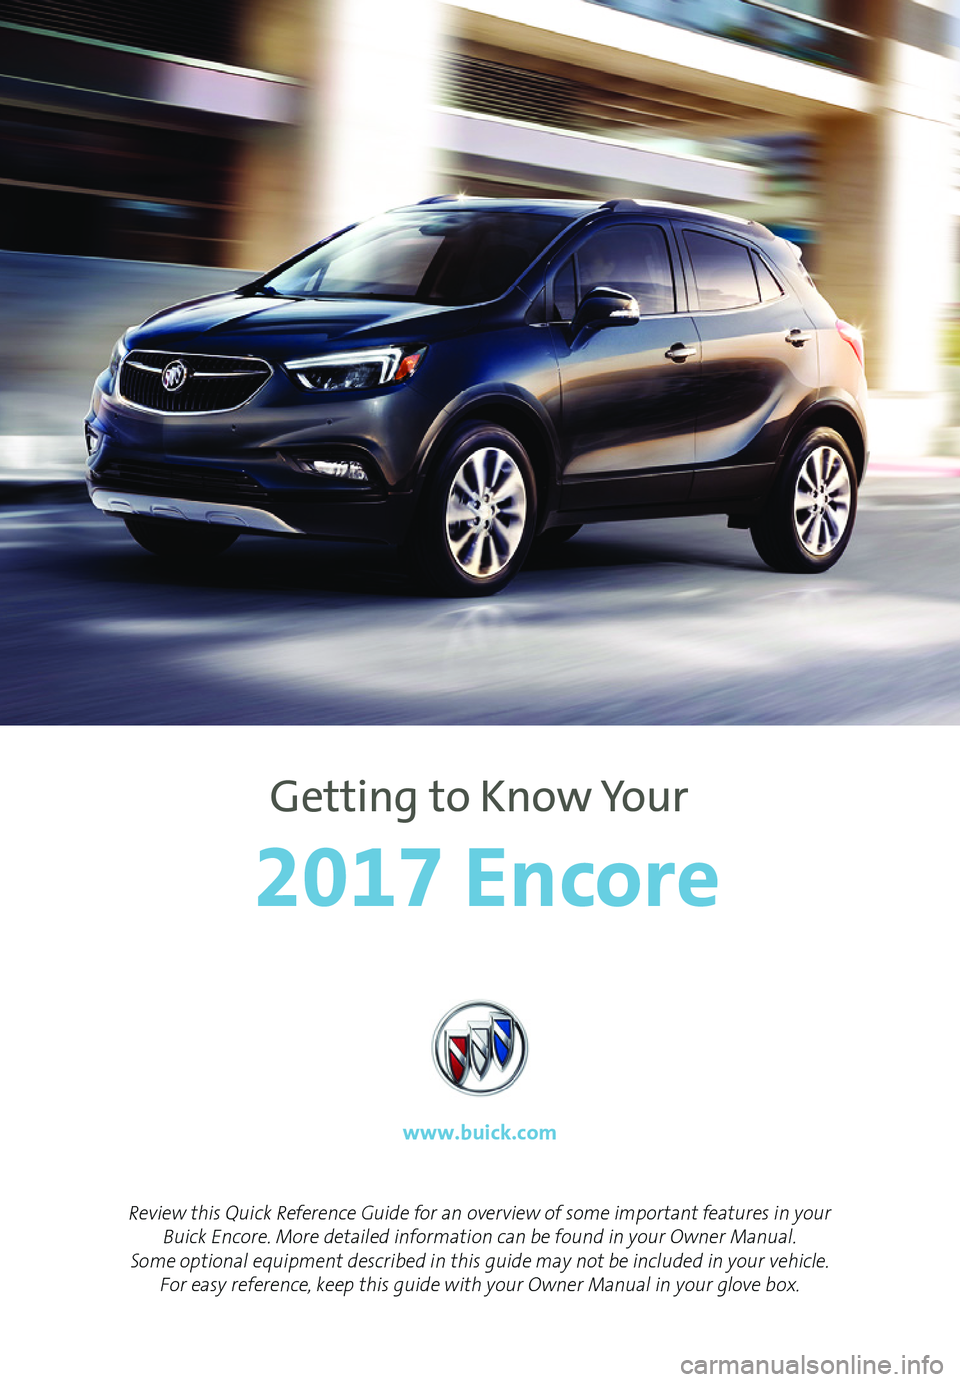 BUICK ENCORE 2017  Get To Know Guide 1
Review this Quick Reference Guide for an overview of some important features in your Buick Encore. More detailed information can be found in your Owner Manual.  Some optional equipment described in 